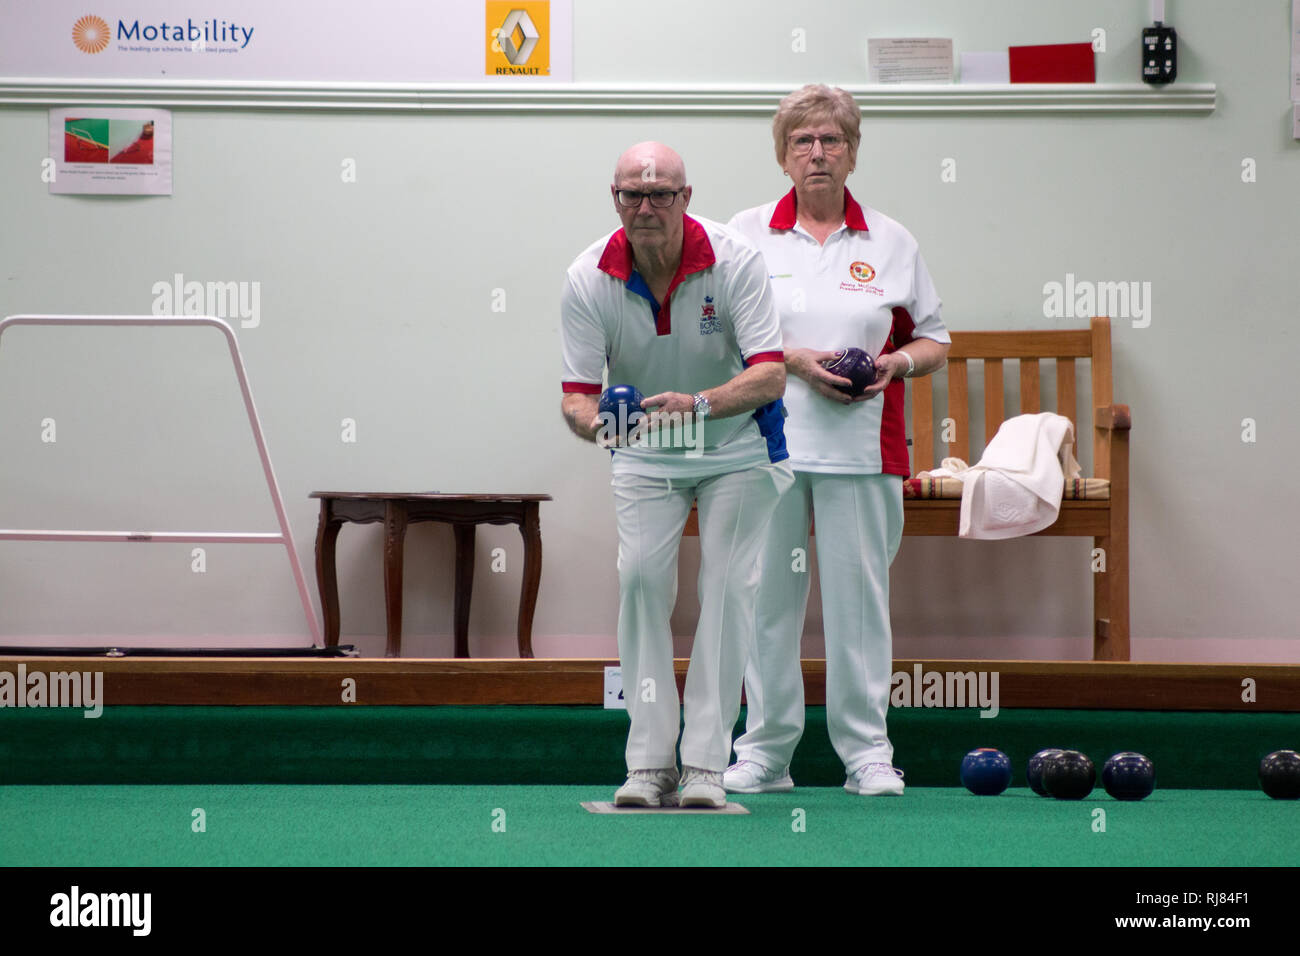 Melton Mowbray Indoor Bowls Club, Leicestershire, UK. 4th February 2019, Charity bowls match between Bowls England,  National Governing Body  for the sport of Flat Green Lawn Bowls in England and the EIBA, English Indoor Bowls Association. The match was finally won by the EIBA. Credit: Jim Harrison/Alamy Live News Stock Photo